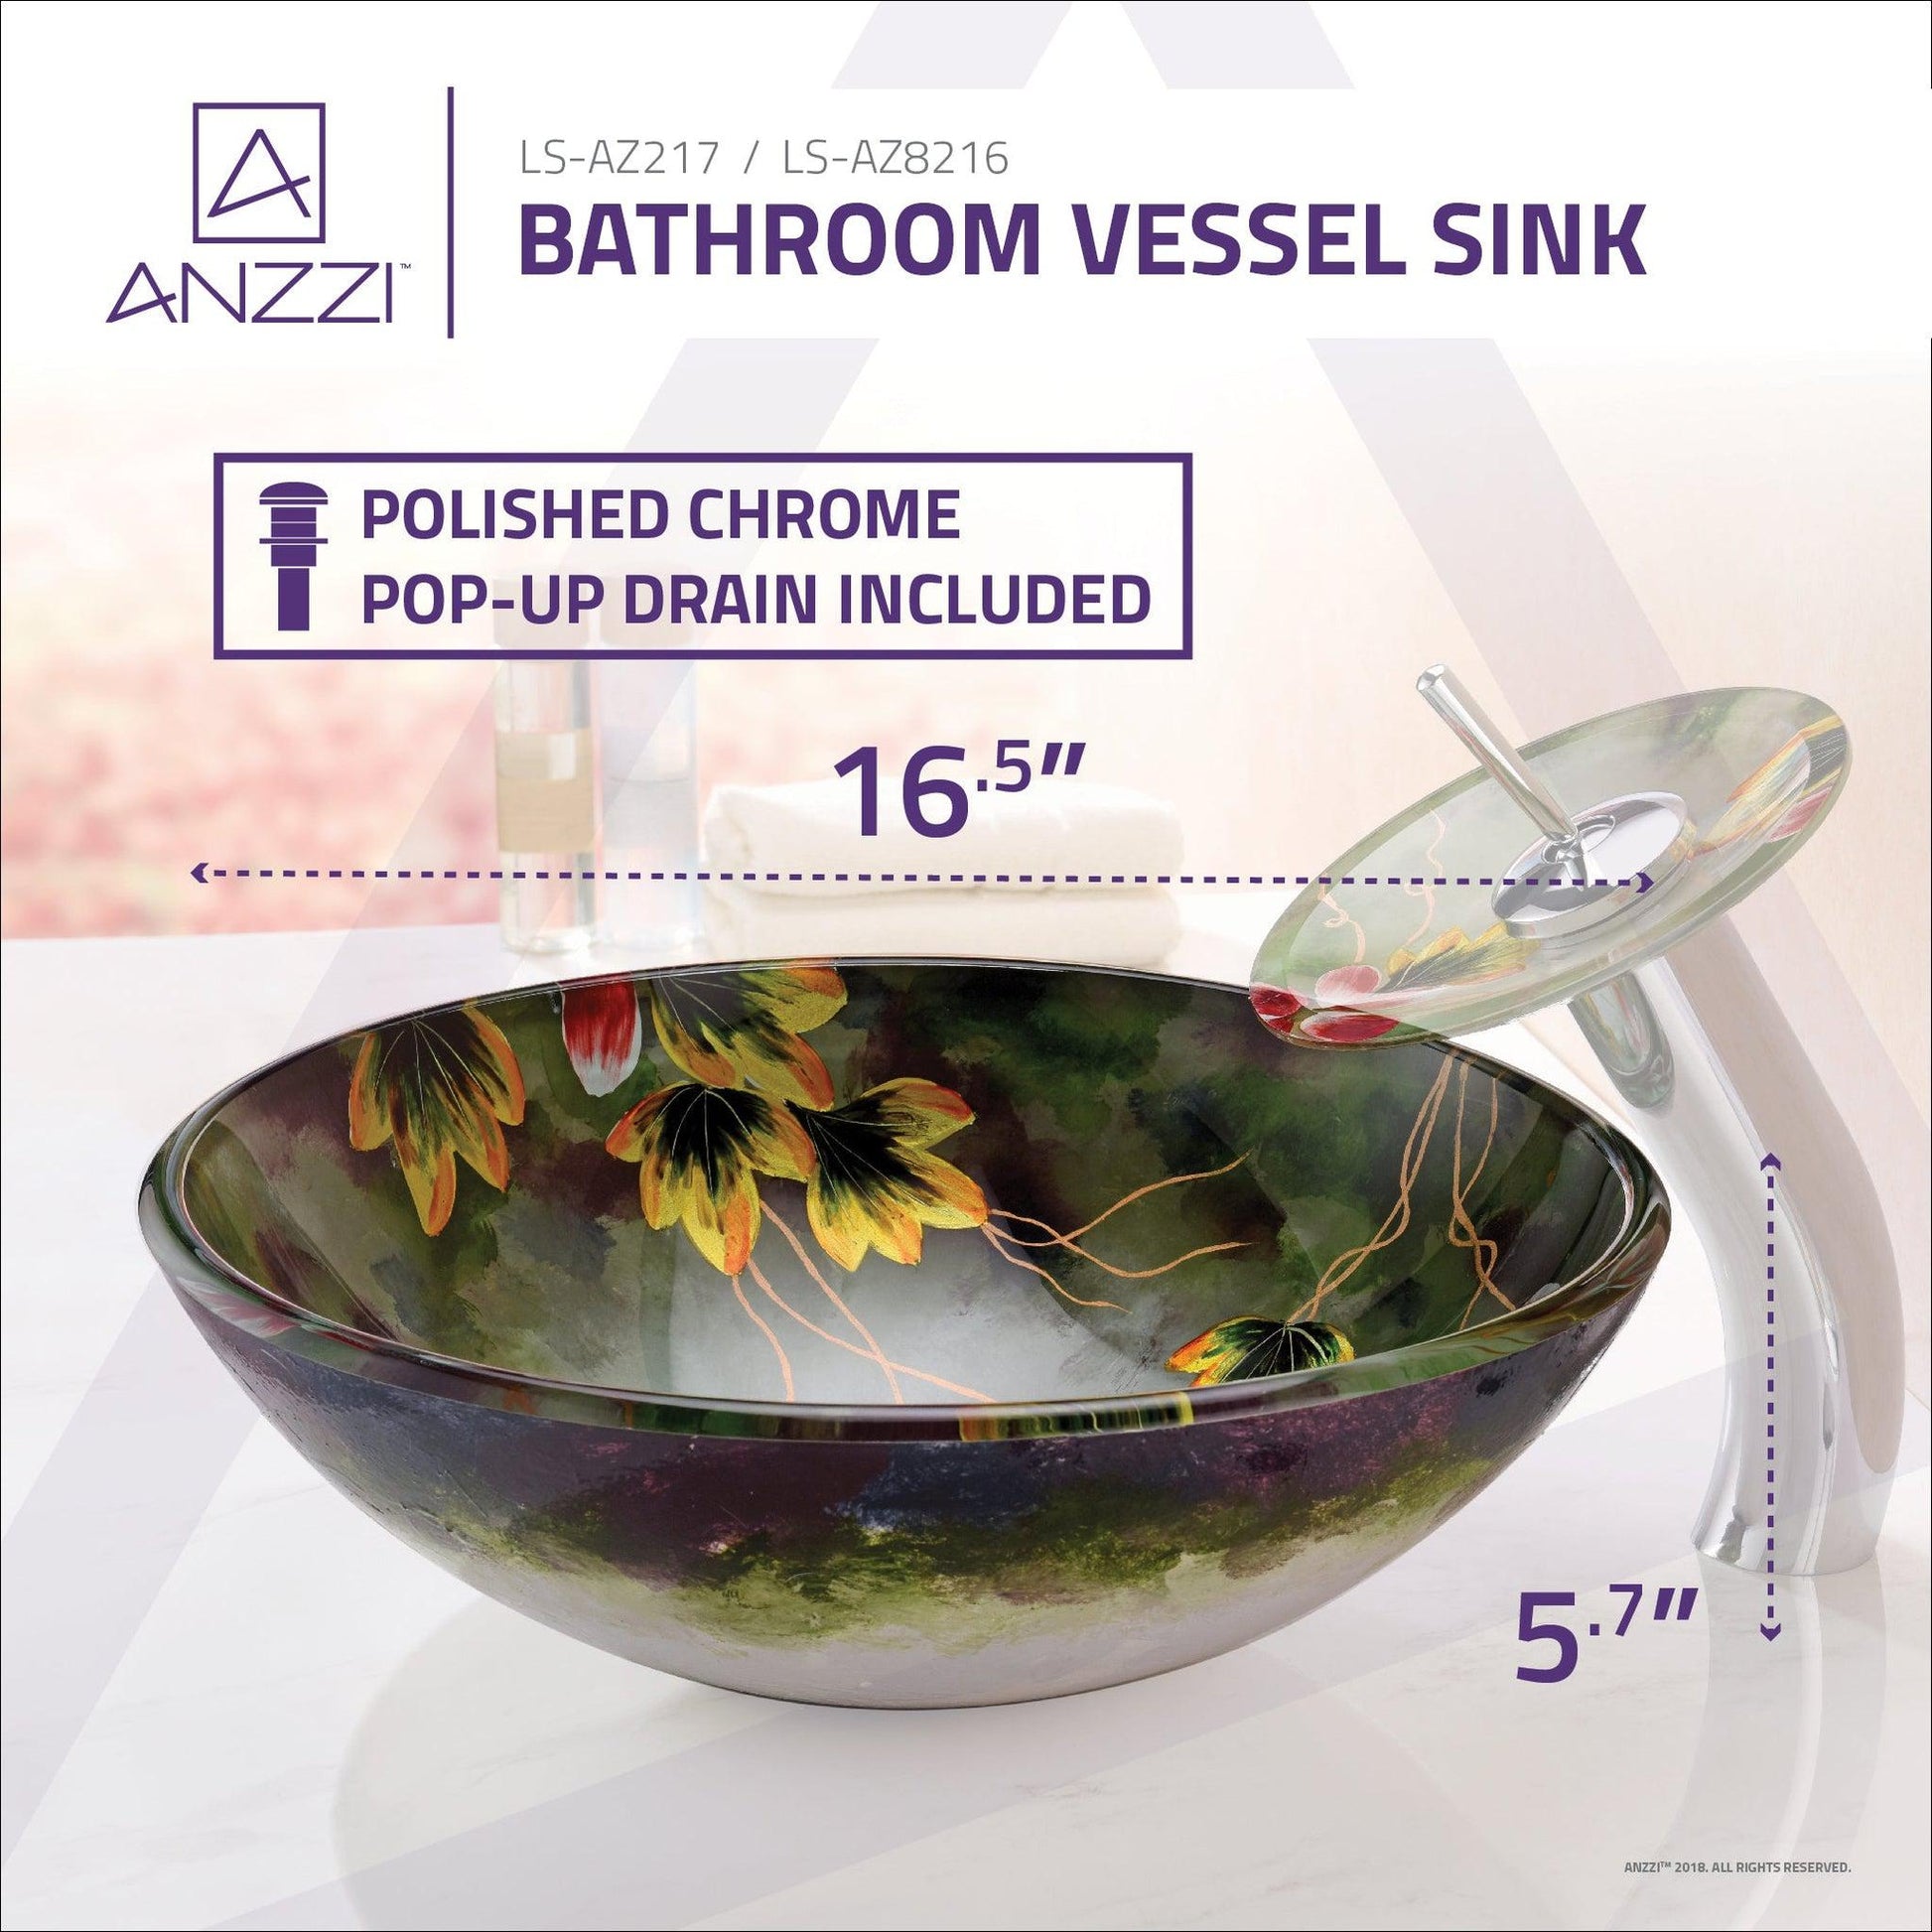 ANZZI Panye Series 17" x 17" Round Green Hand Painted Mural Deco-Glass Vessel Sink With Polished Chrome Pop-Up Drain and Waterfall Faucet